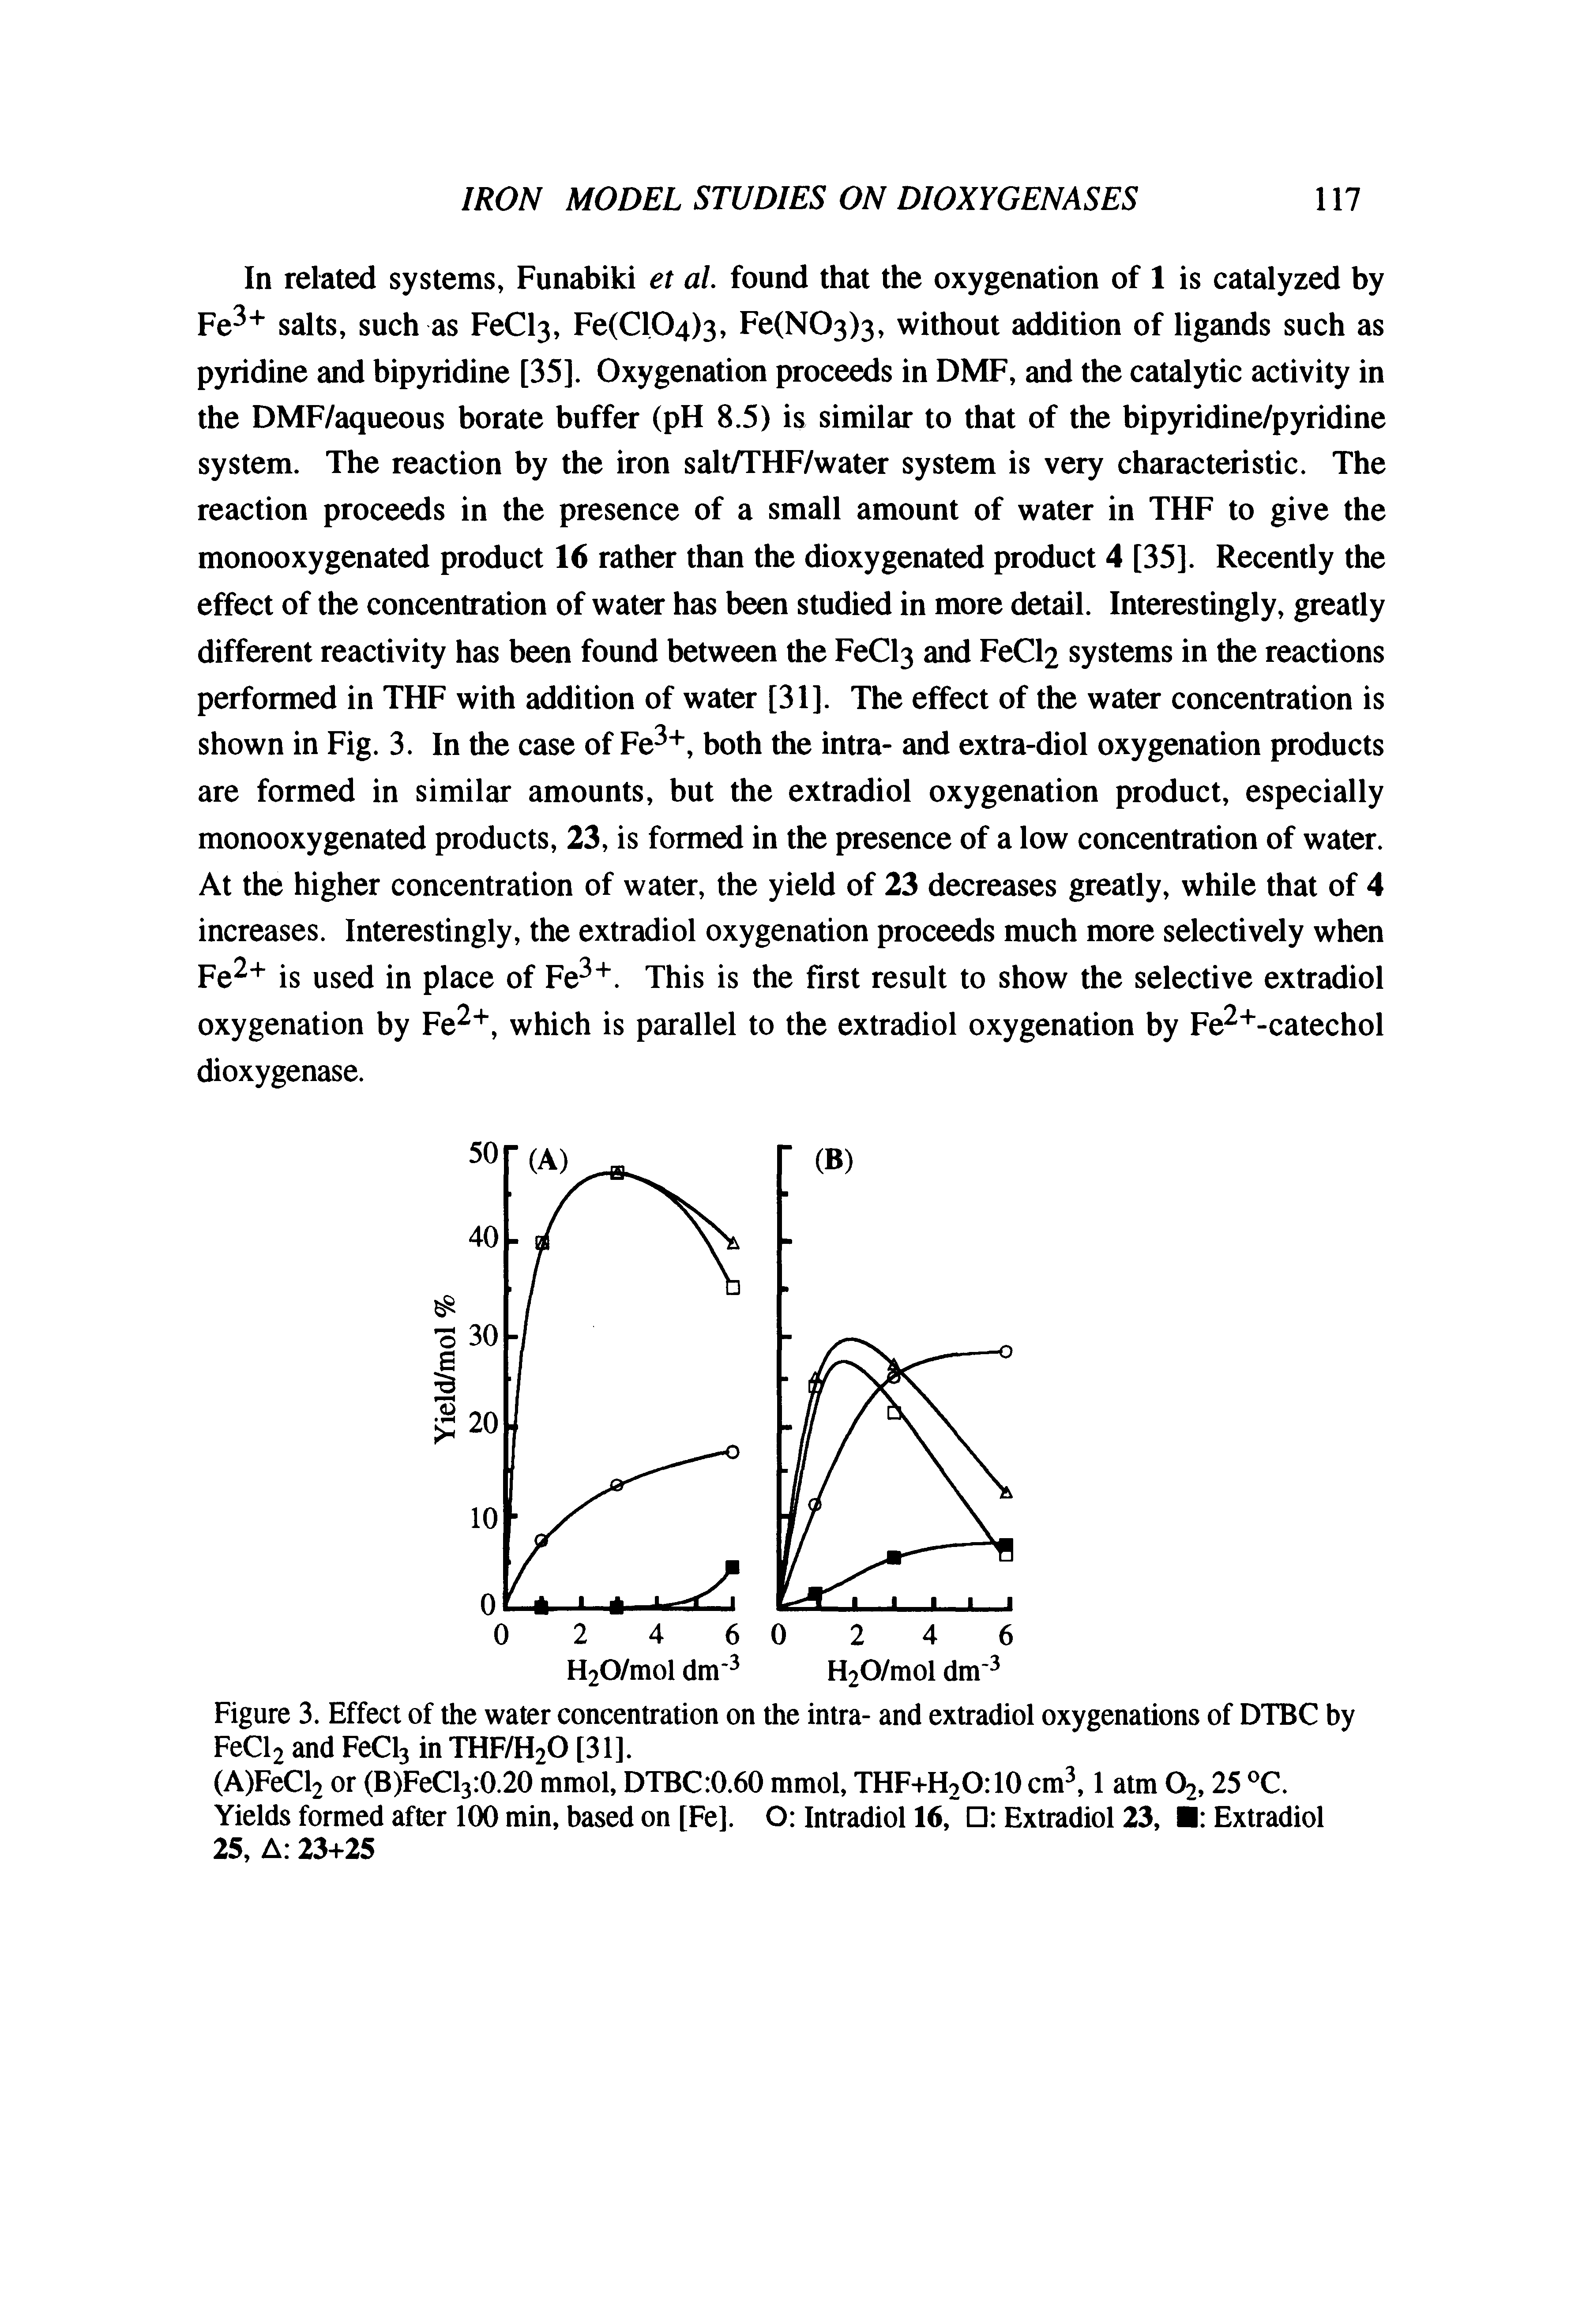 Figure 3. Effect of the water concentration on the intra- and extradiol oxygenations of DTBC by FeCl2 and FeCl3 in THF/H2O [31].